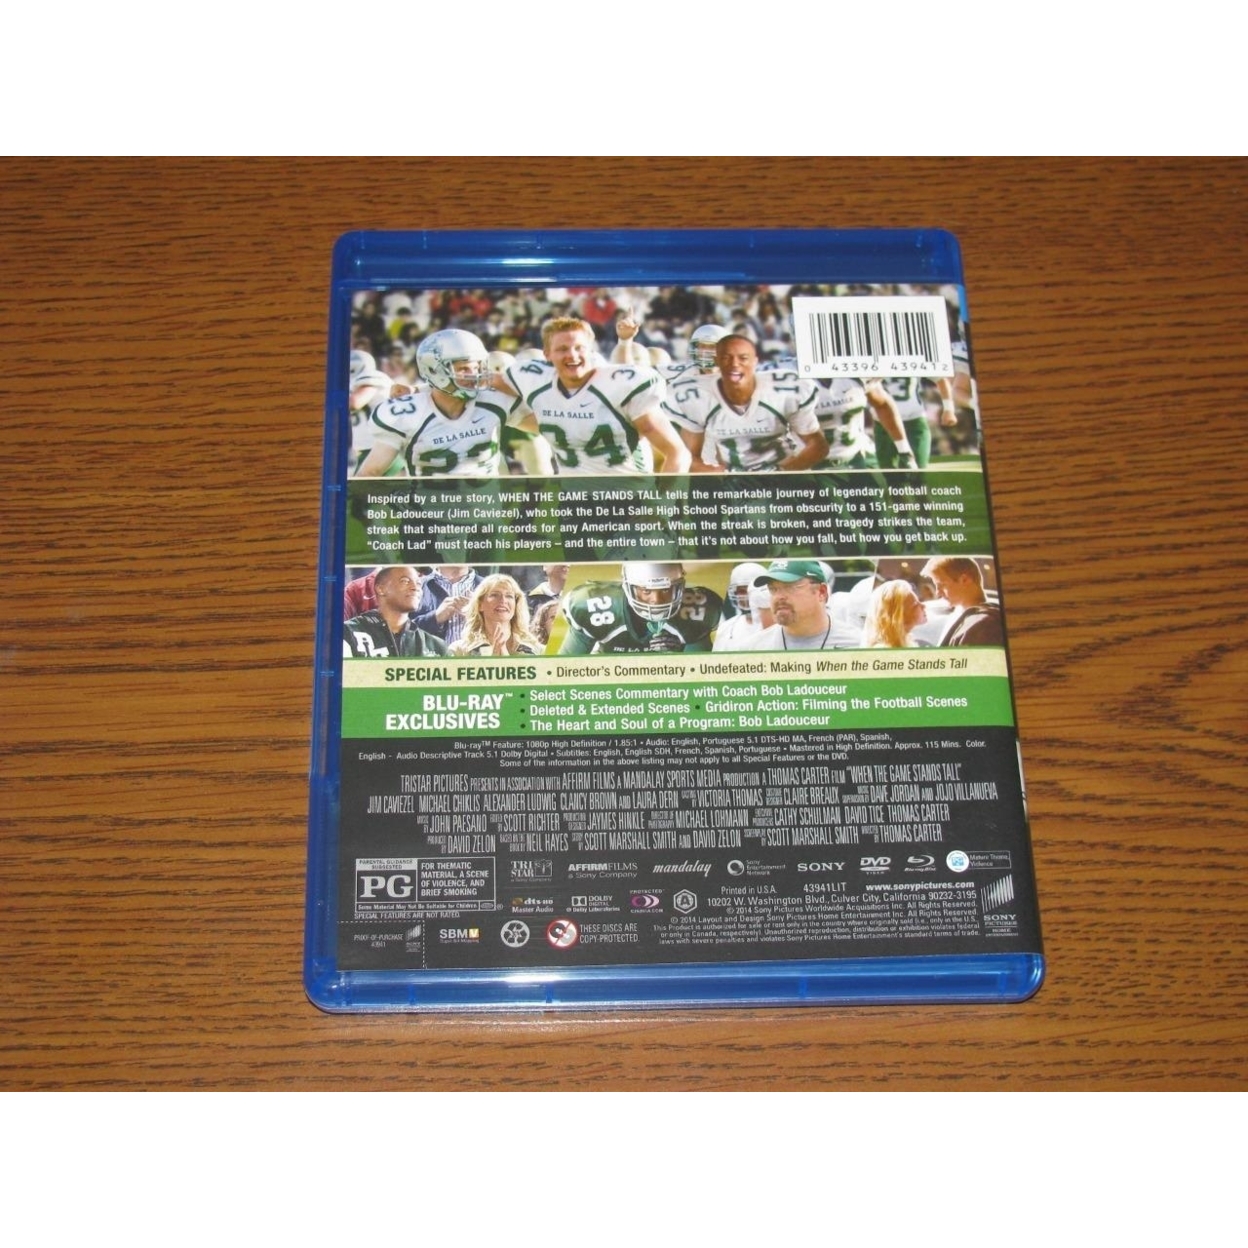 When the Game Stands Tall (Blu-ray + DVD) - image 3 of 3